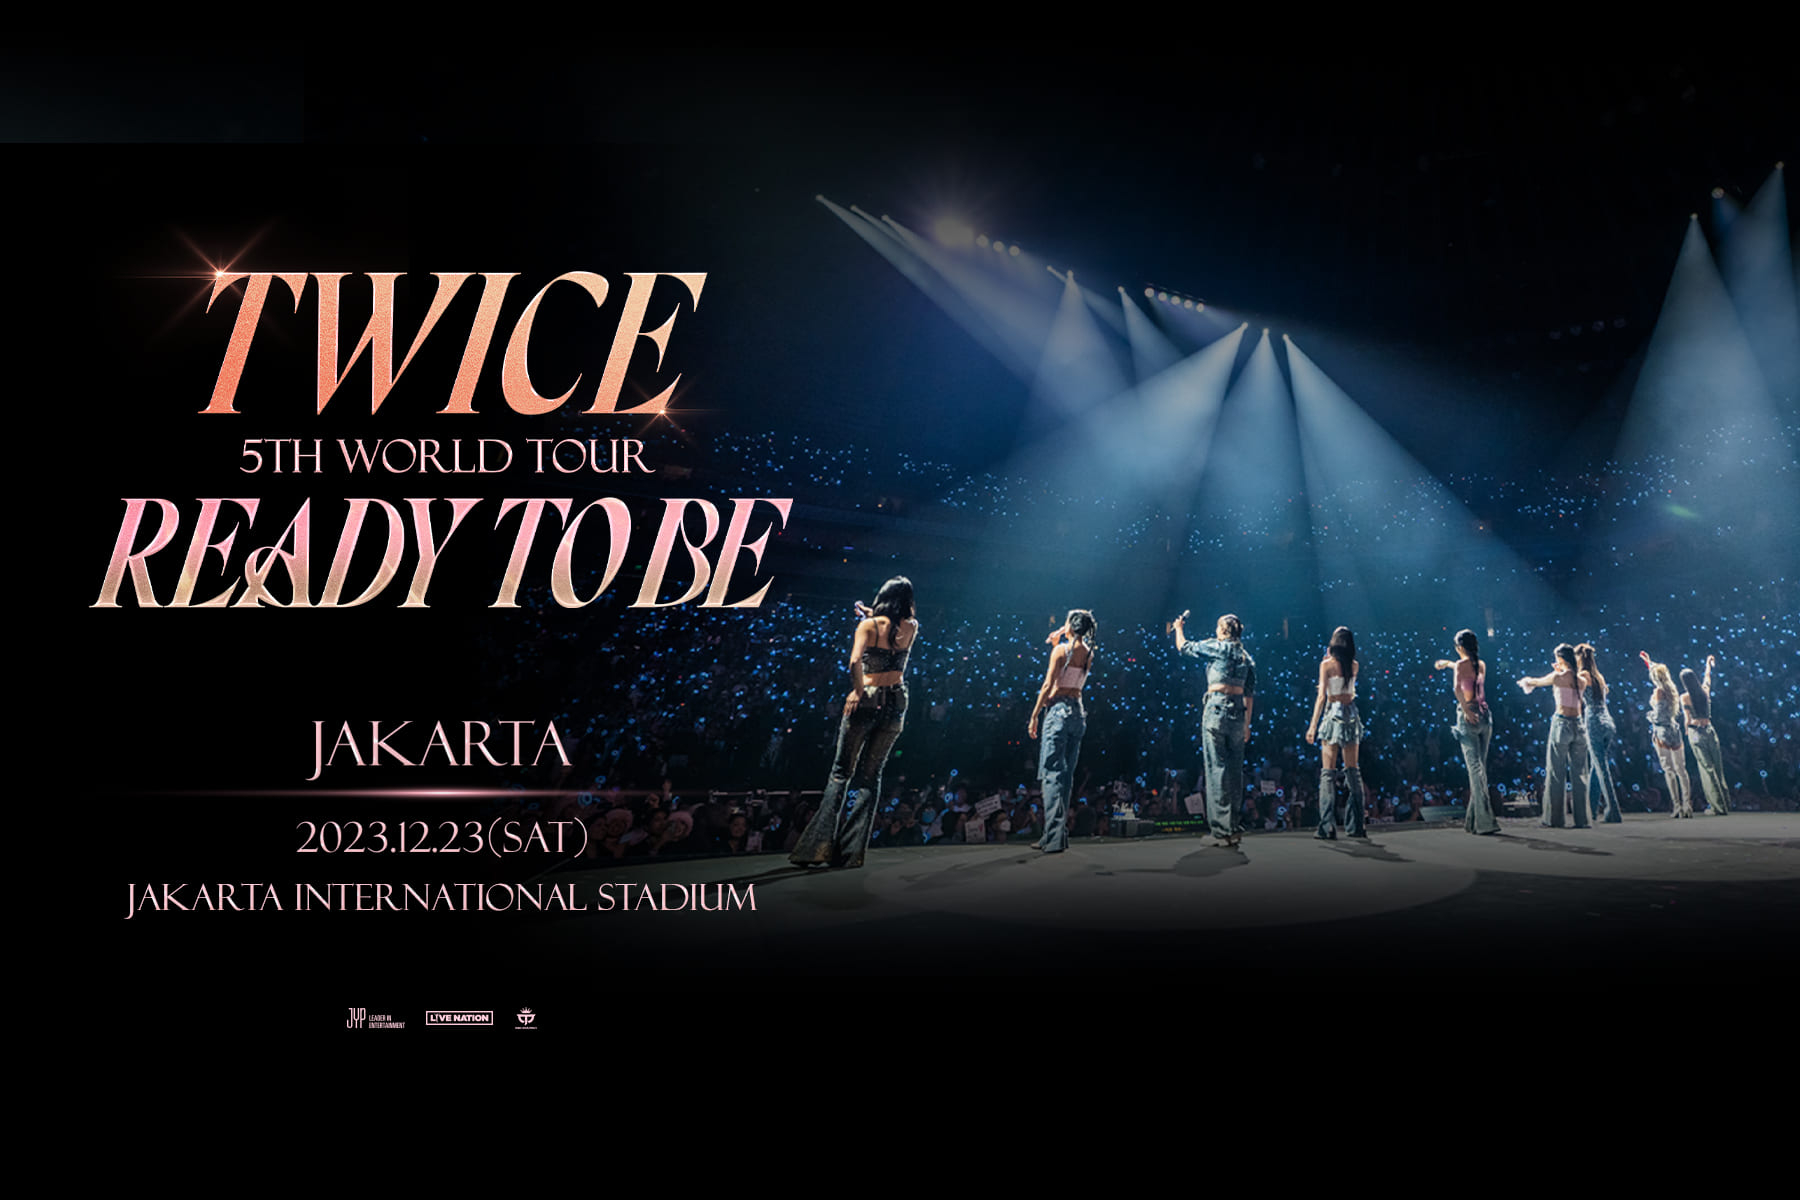 Live Nation Kpop on X: TWICE 5TH WORLD TOUR 'READY TO BE' IN